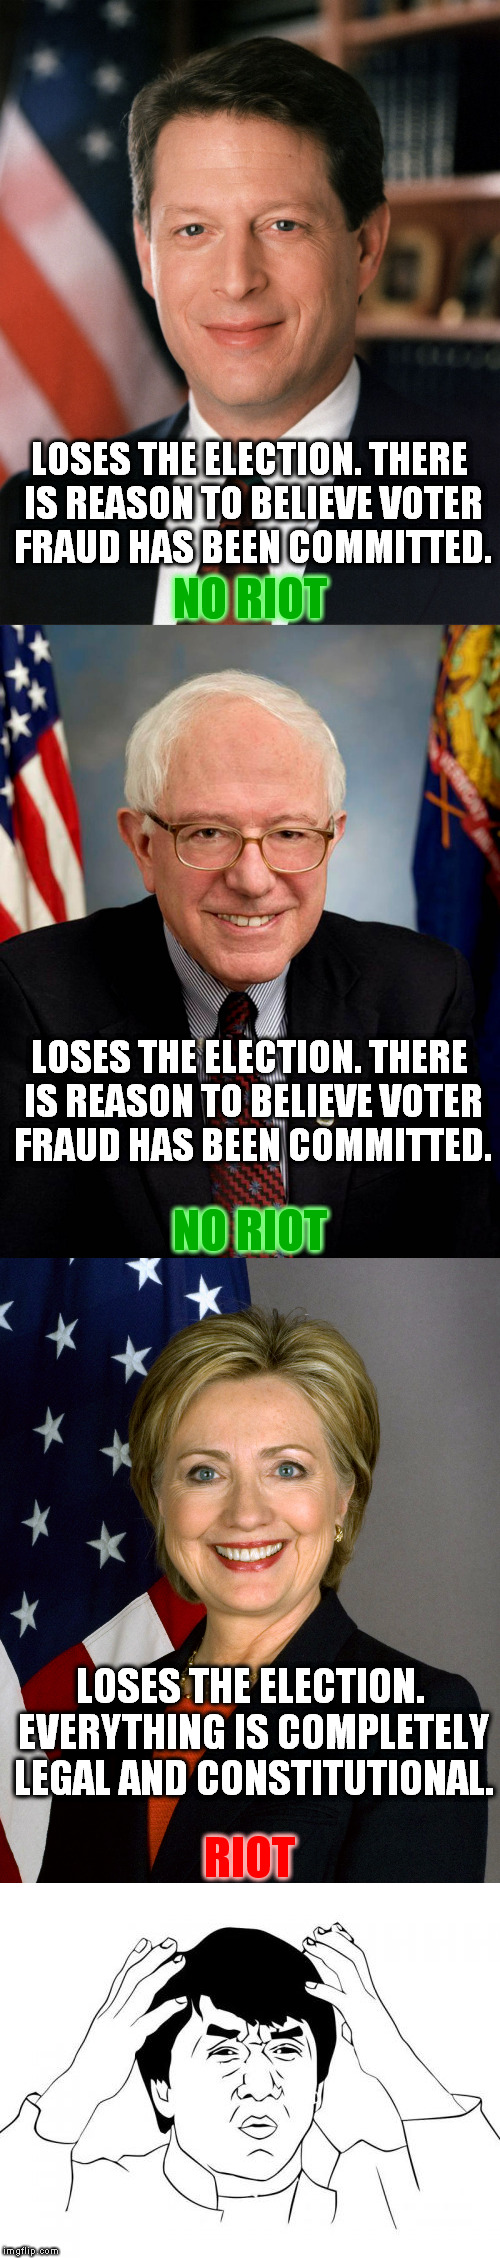 LOSES THE ELECTION. THERE IS REASON TO BELIEVE VOTER FRAUD HAS BEEN COMMITTED. NO RIOT; LOSES THE ELECTION. THERE IS REASON TO BELIEVE VOTER FRAUD HAS BEEN COMMITTED. NO RIOT; LOSES THE ELECTION. EVERYTHING IS COMPLETELY LEGAL AND CONSTITUTIONAL. RIOT | image tagged in memes,al gore 2000,bernie sanders 2016,hillary clinton 2016,election 2016 aftermath,riot | made w/ Imgflip meme maker